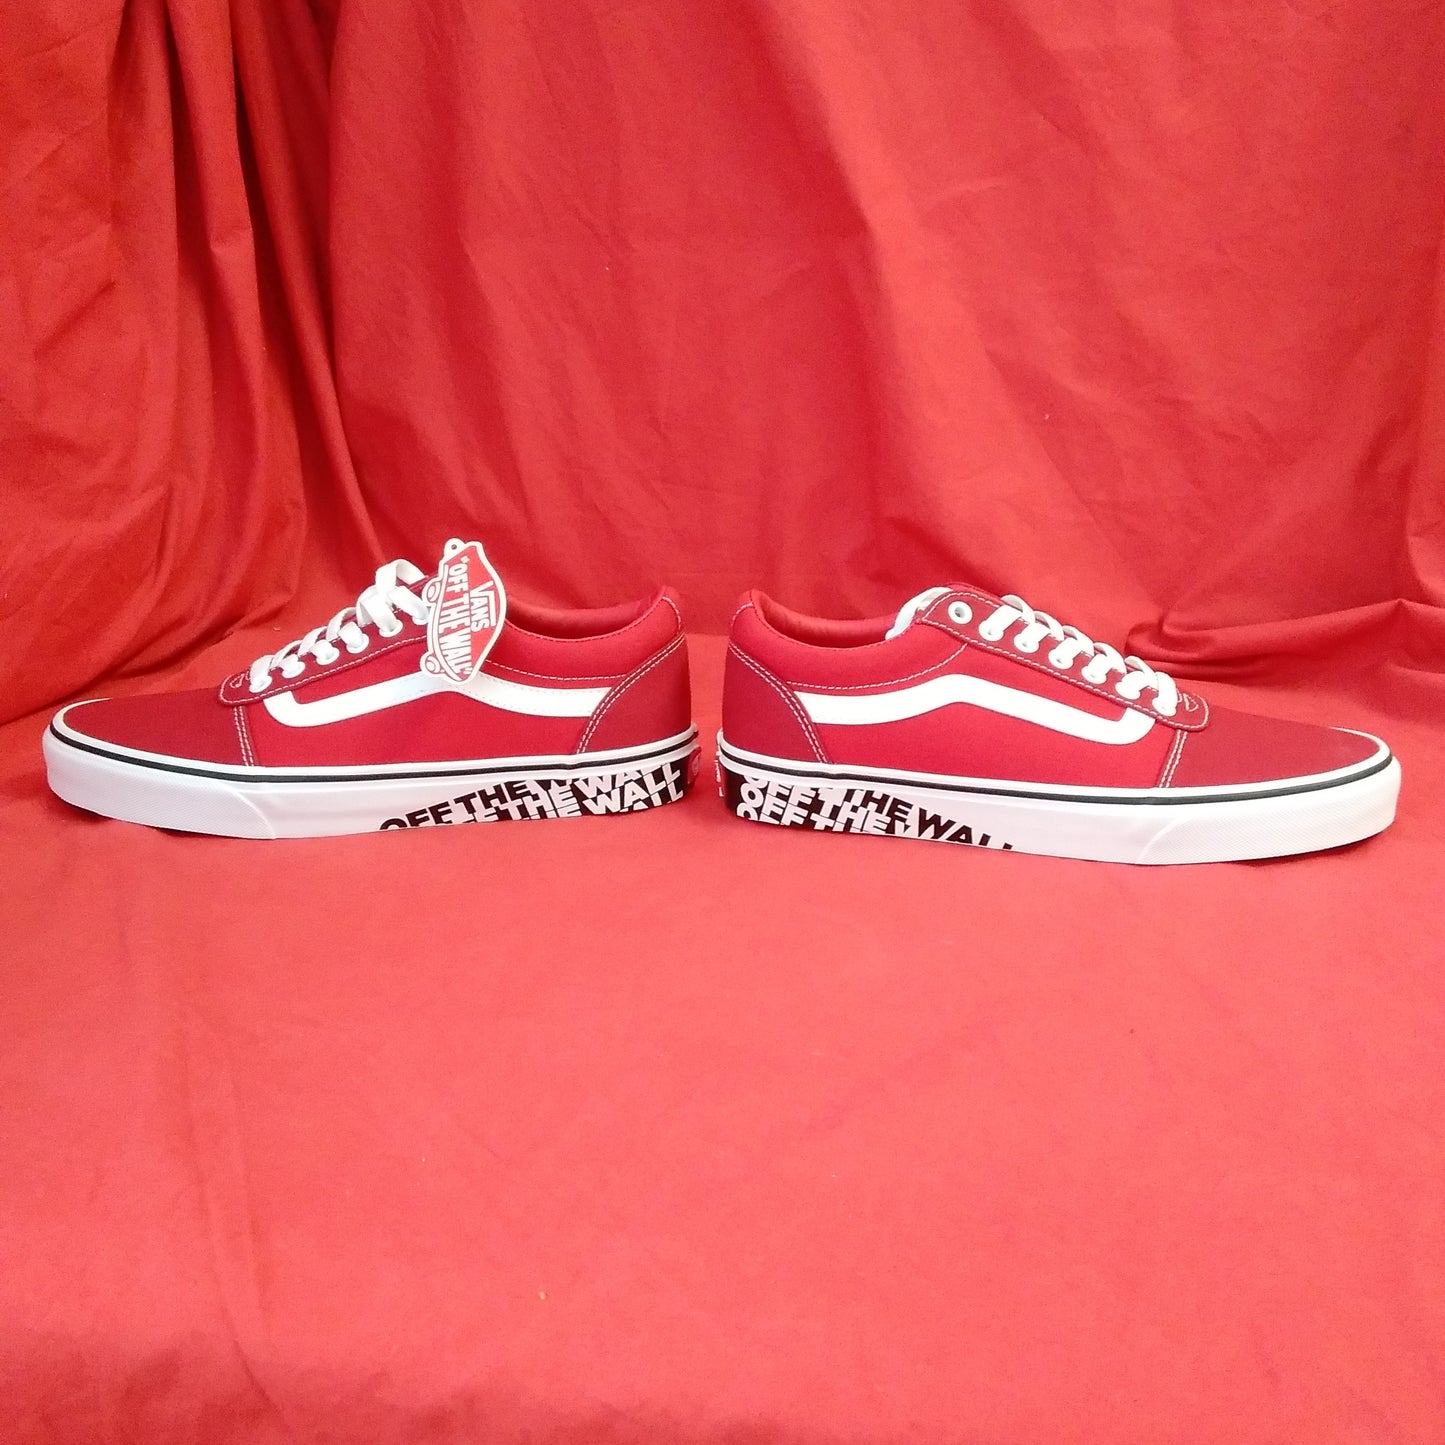 NEW - Vans Men's Red with White Stripe Ward Off The Wall Sneaker Style: 500714 - Size: 9